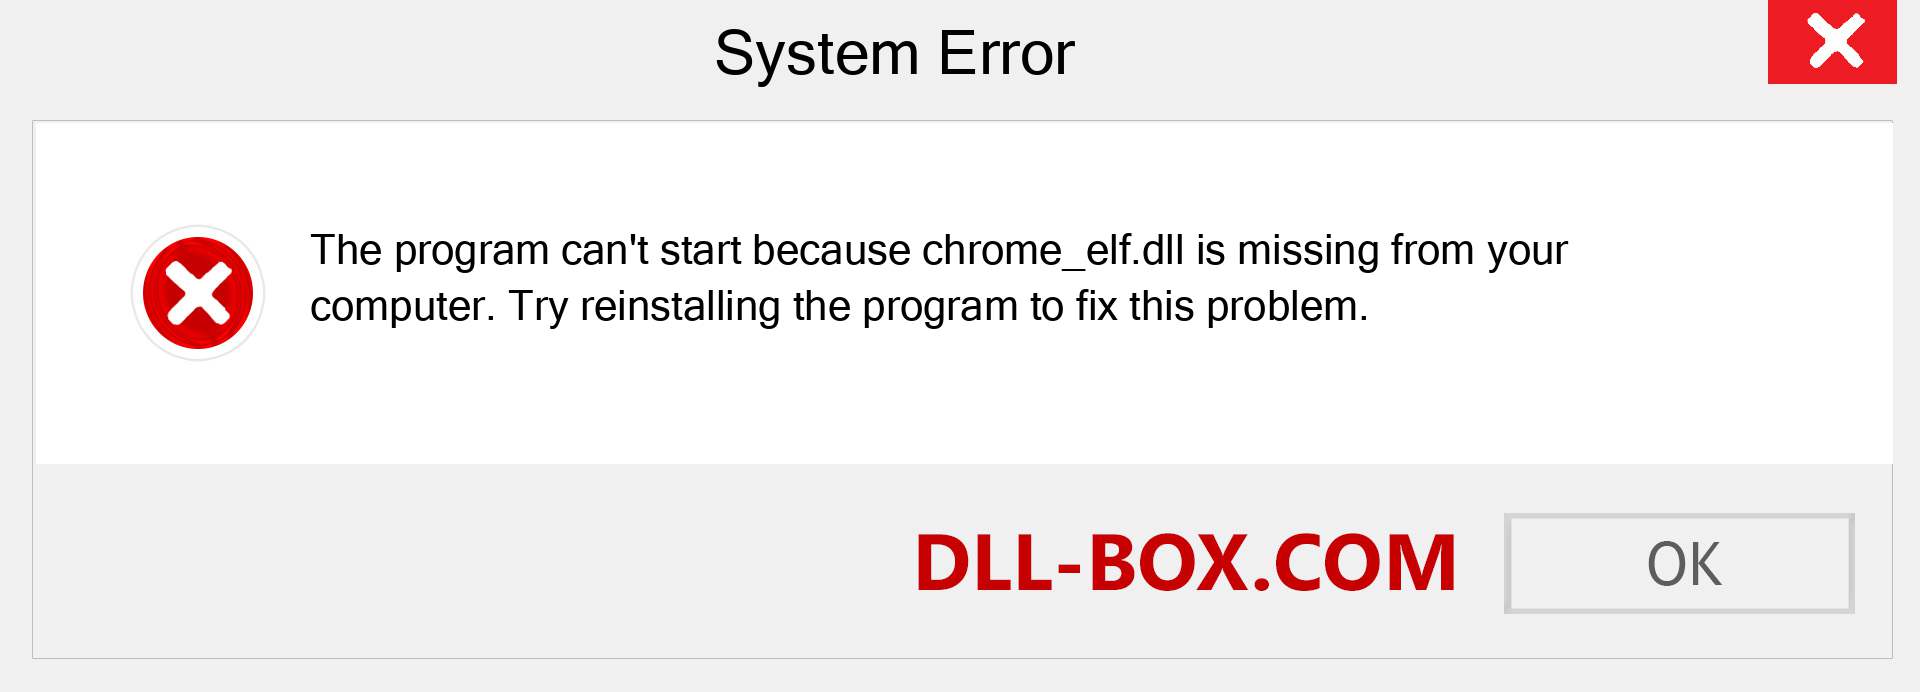  chrome_elf.dll file is missing?. Download for Windows 7, 8, 10 - Fix  chrome_elf dll Missing Error on Windows, photos, images